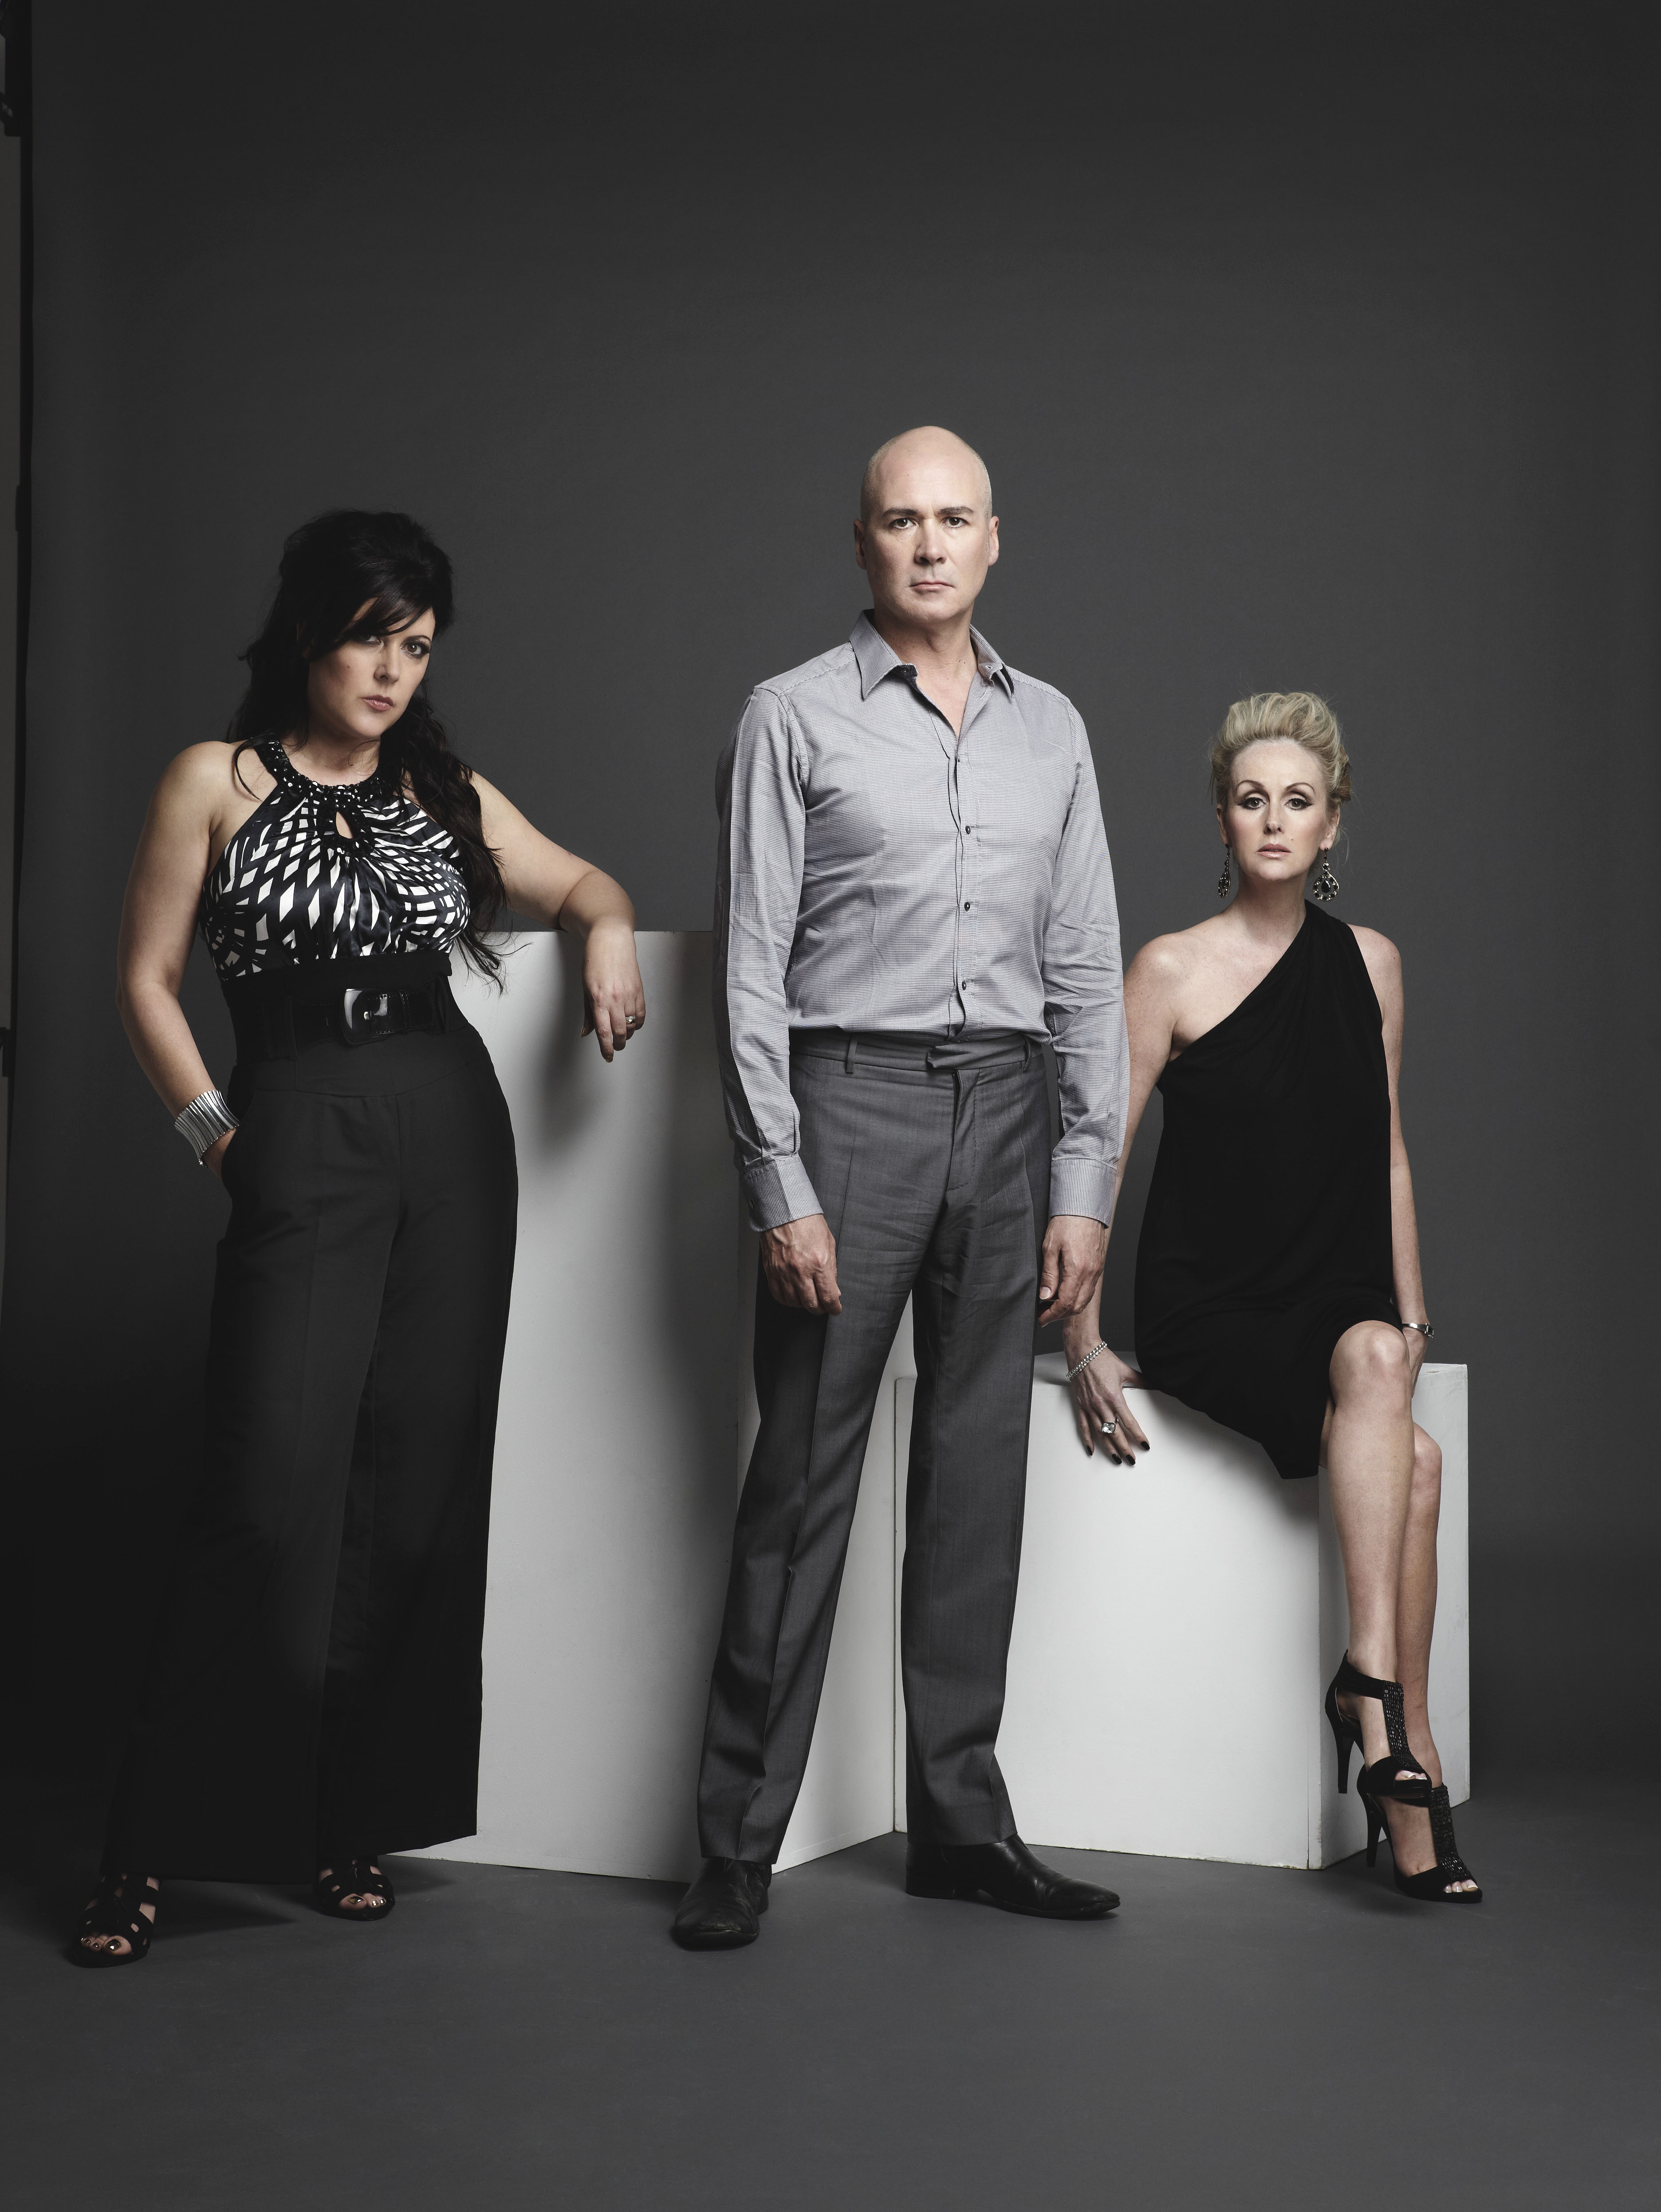 The Human League know you still want them | The Japan Times